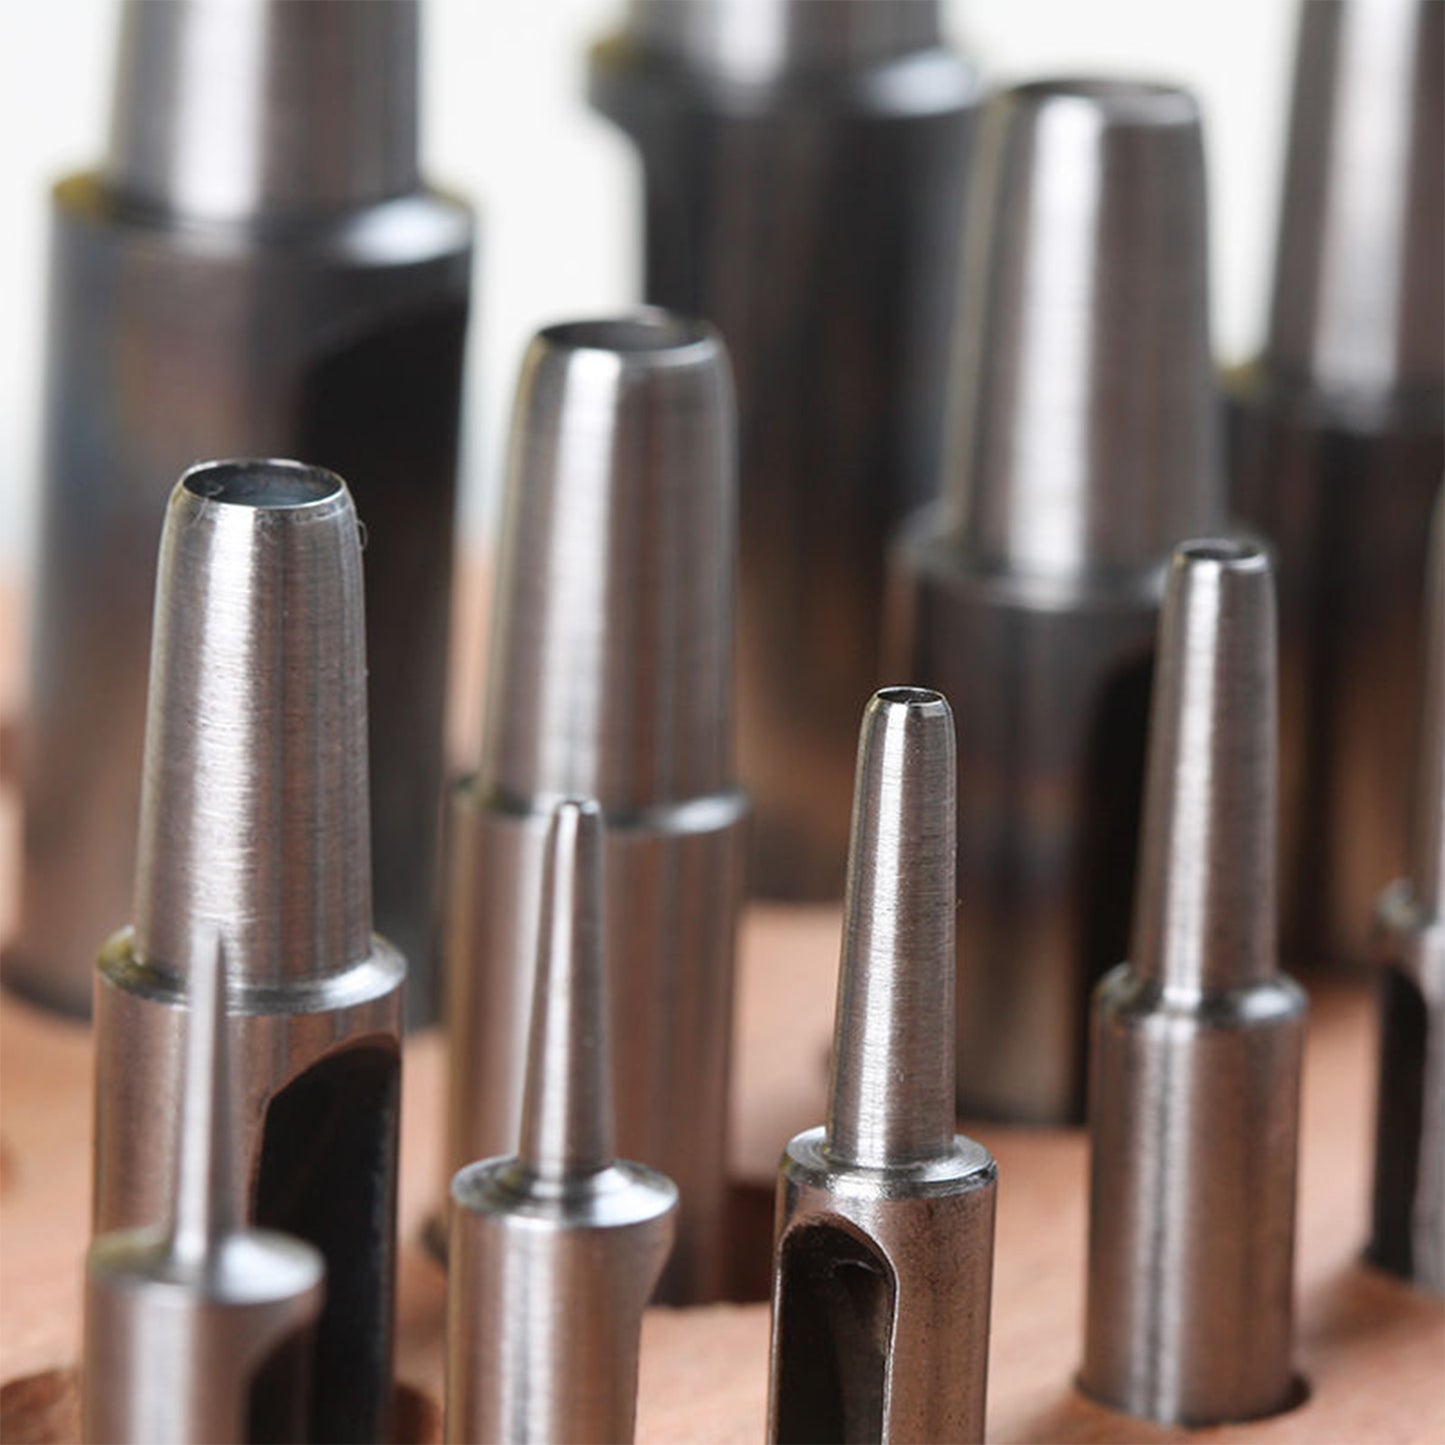 SPC Round Detail Punches